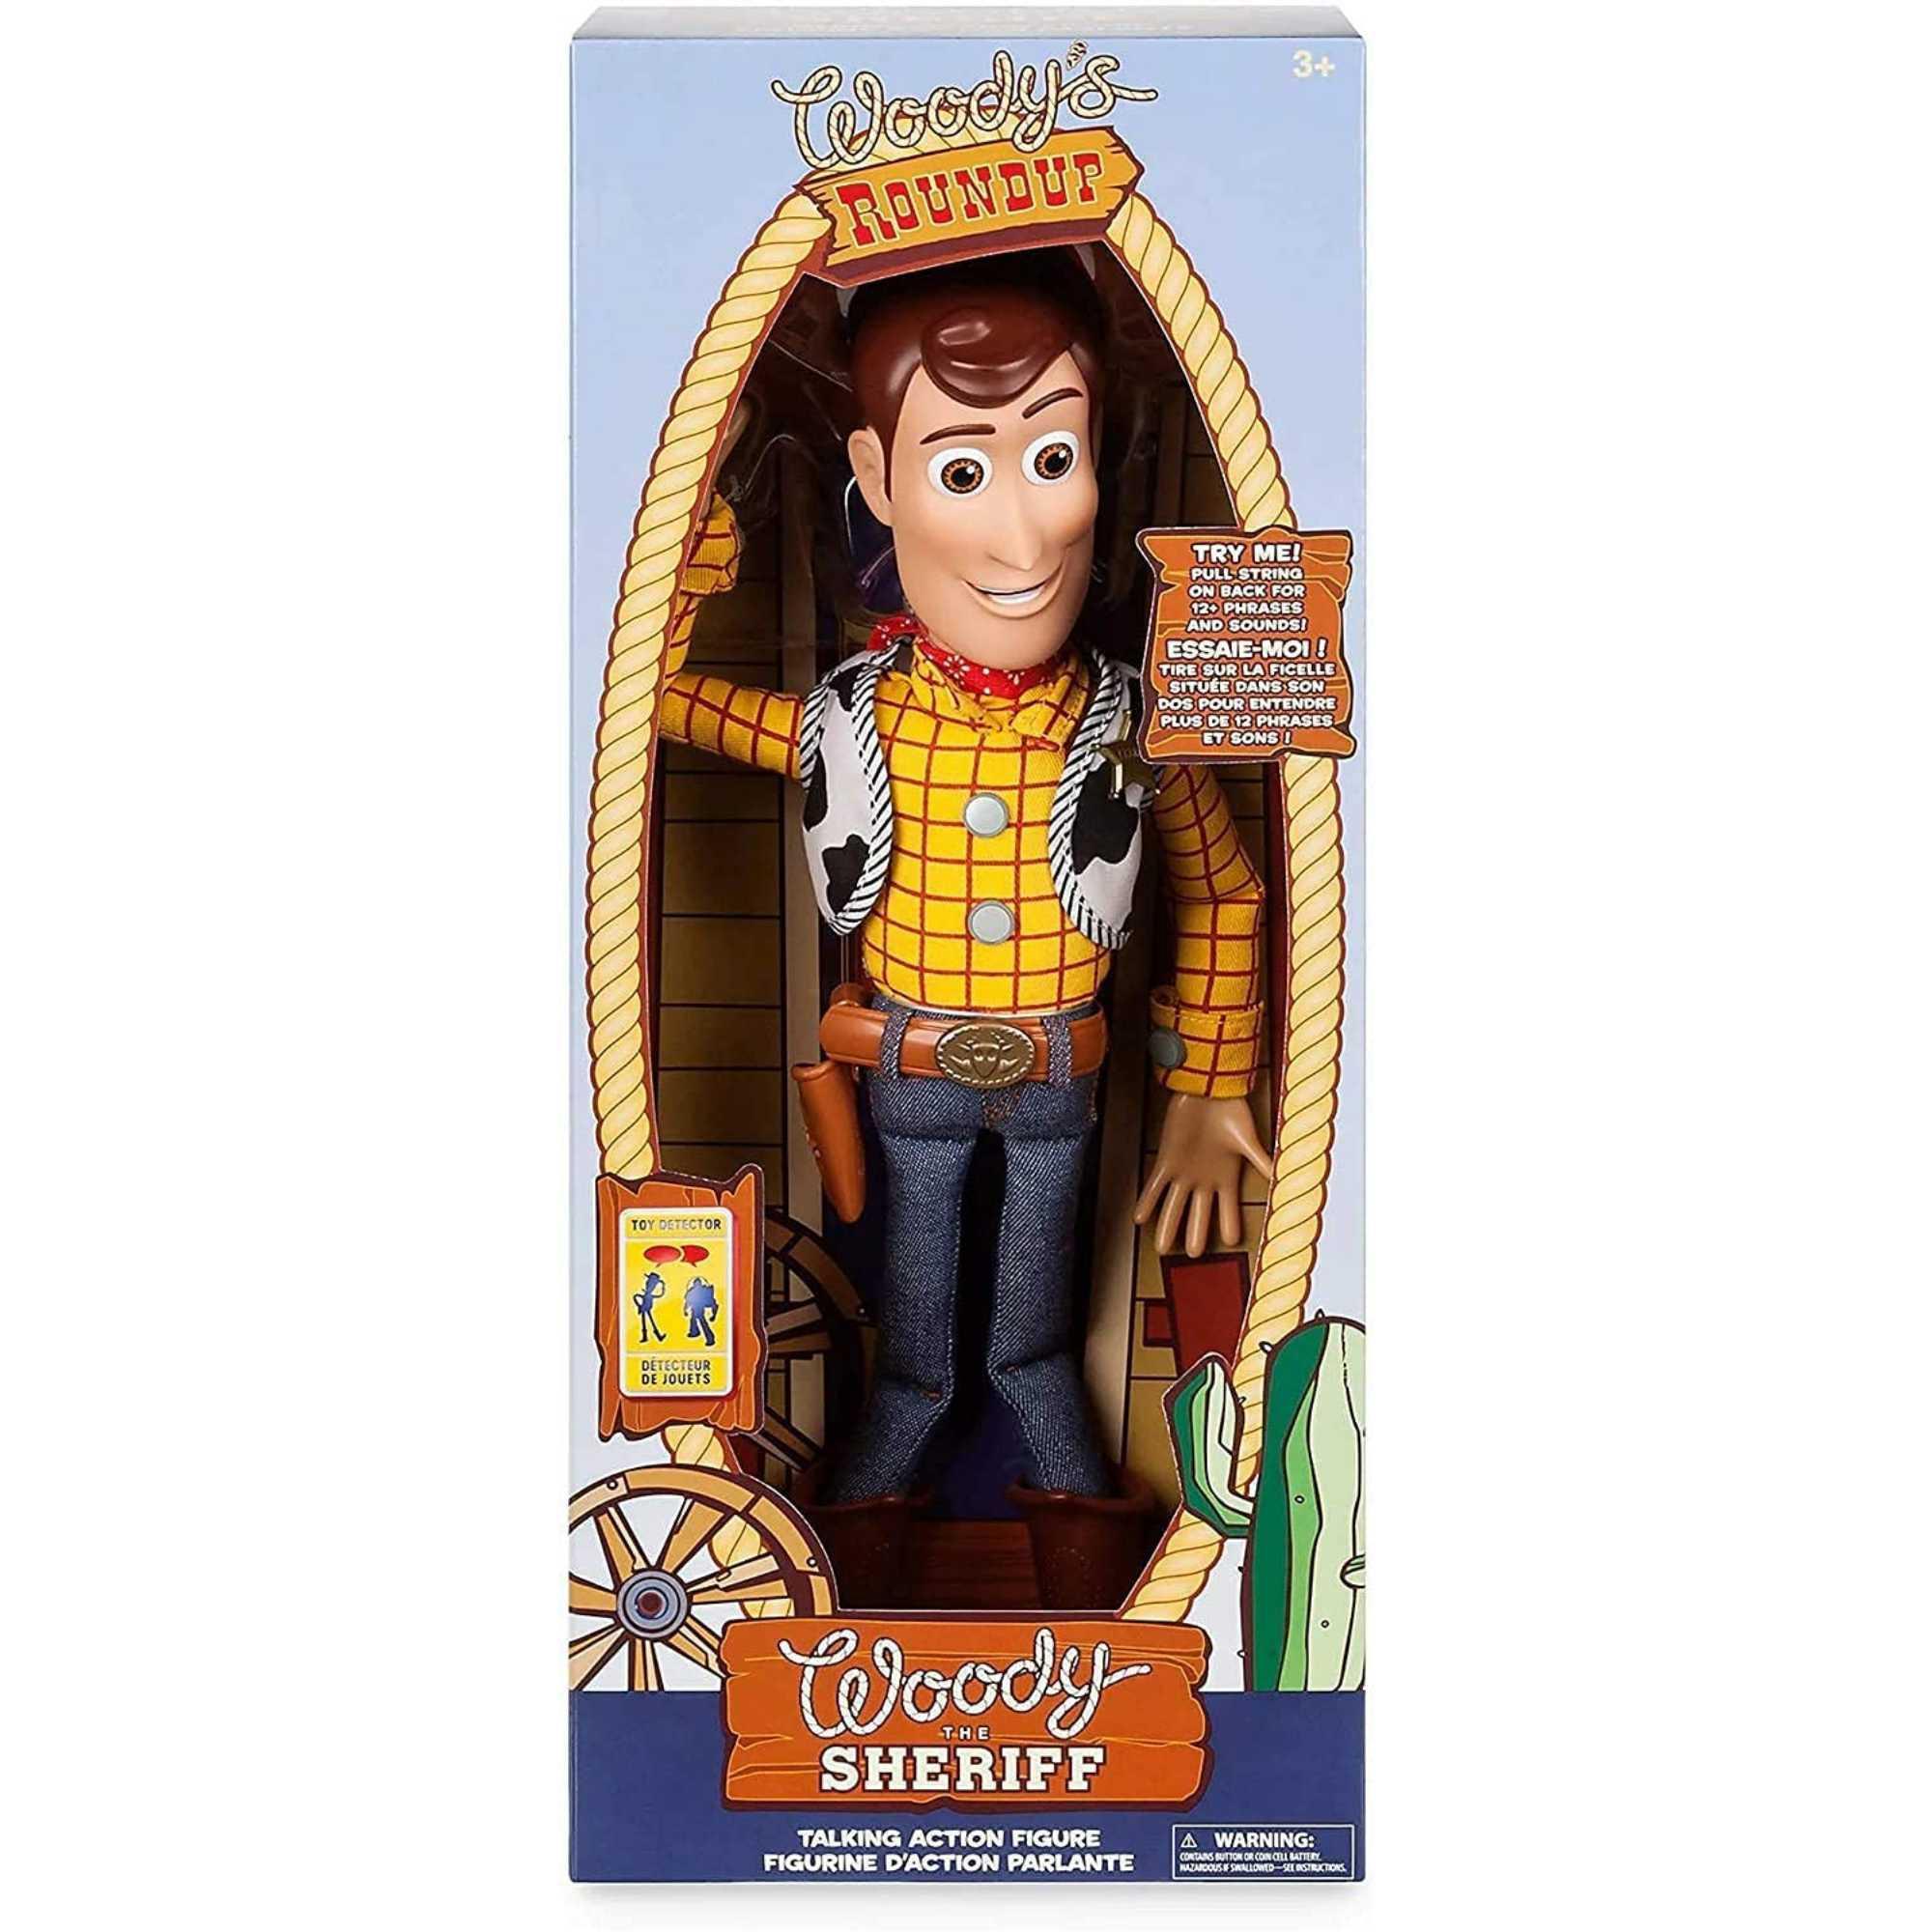 Disney Toy Story Woody Interactive Talking Action Figure 24906